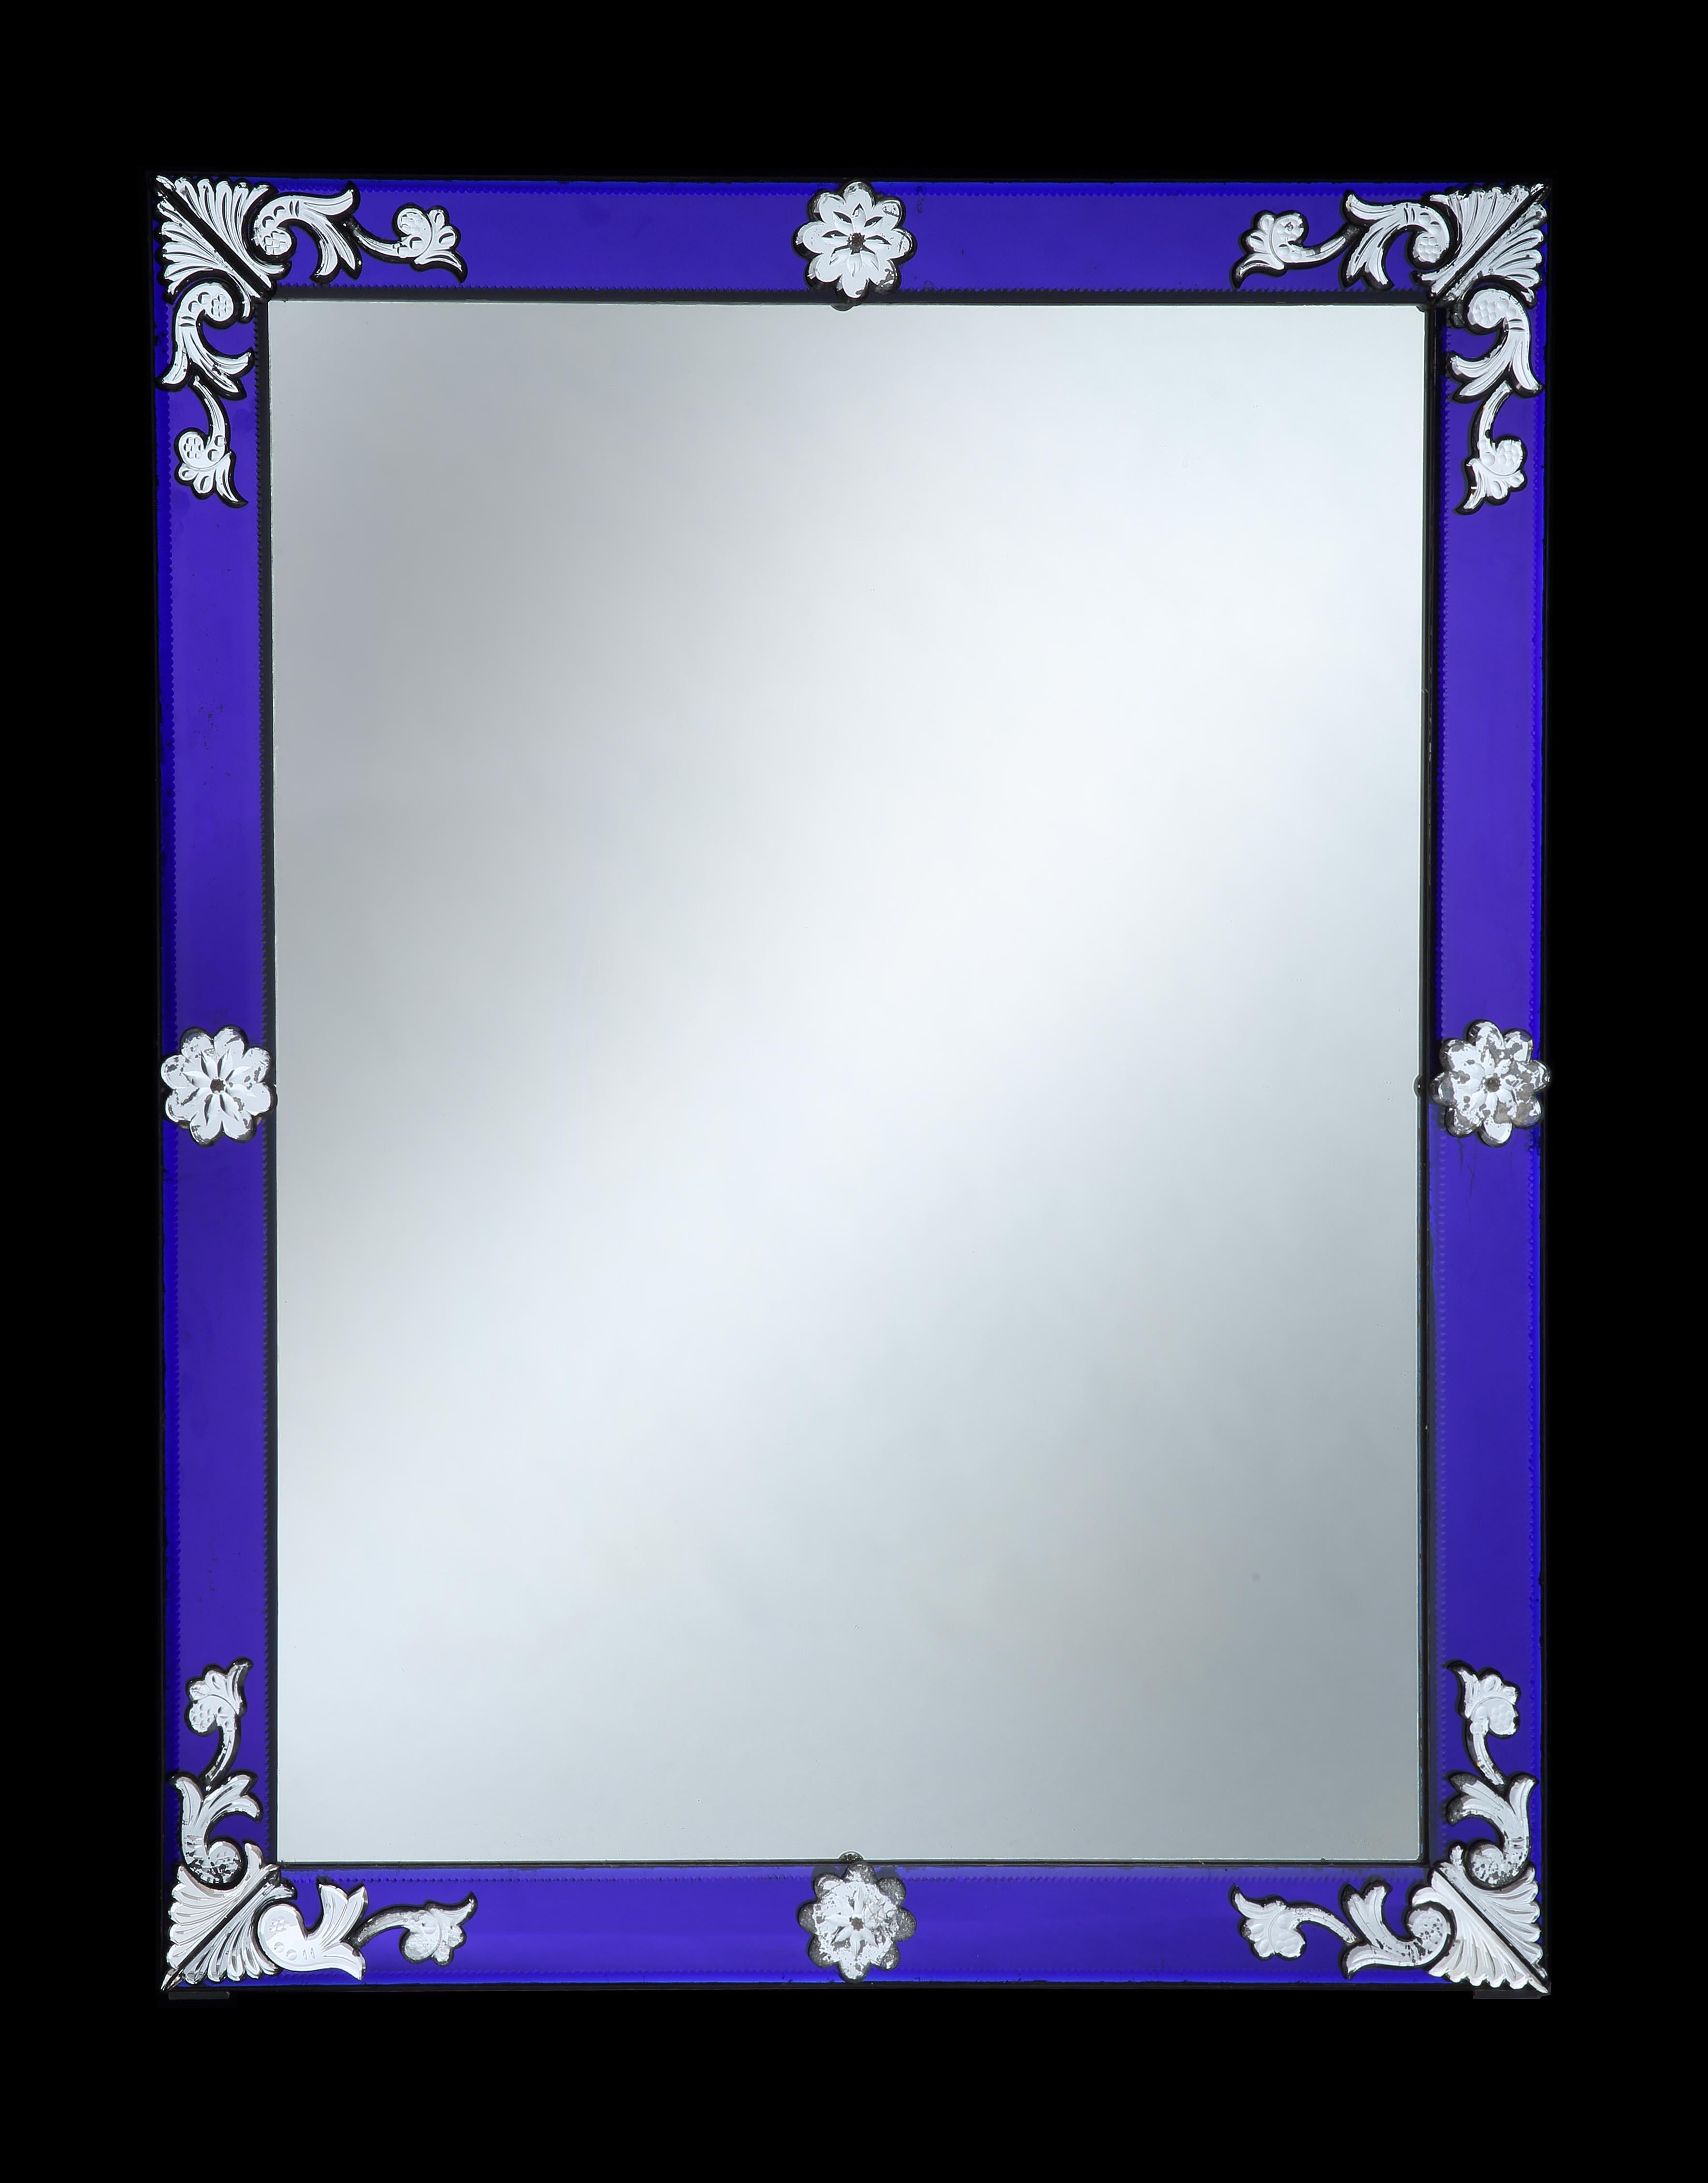 Italy, circa 1890

An exceptional late 19th century Venetian mirror of large scale, with striking cobalt blue glass borders and foliate designs of flowers and paterae to the corners and marginal plates, retaining the original mercury mirror